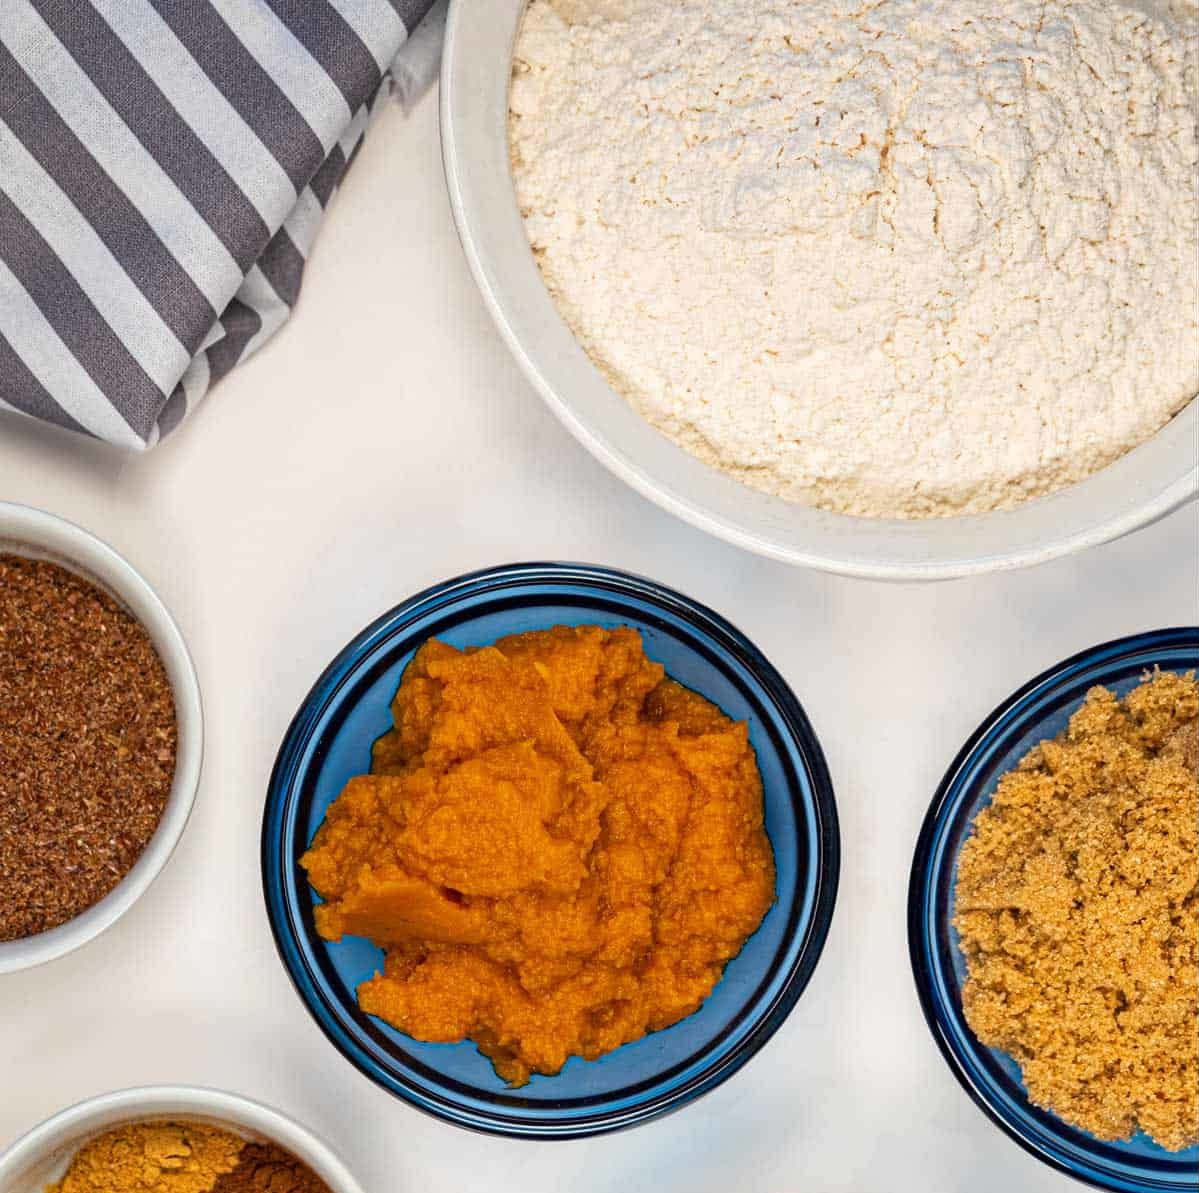 A variety of small dishes filled with pumpkin puree, brown sugar, spices, and flour.